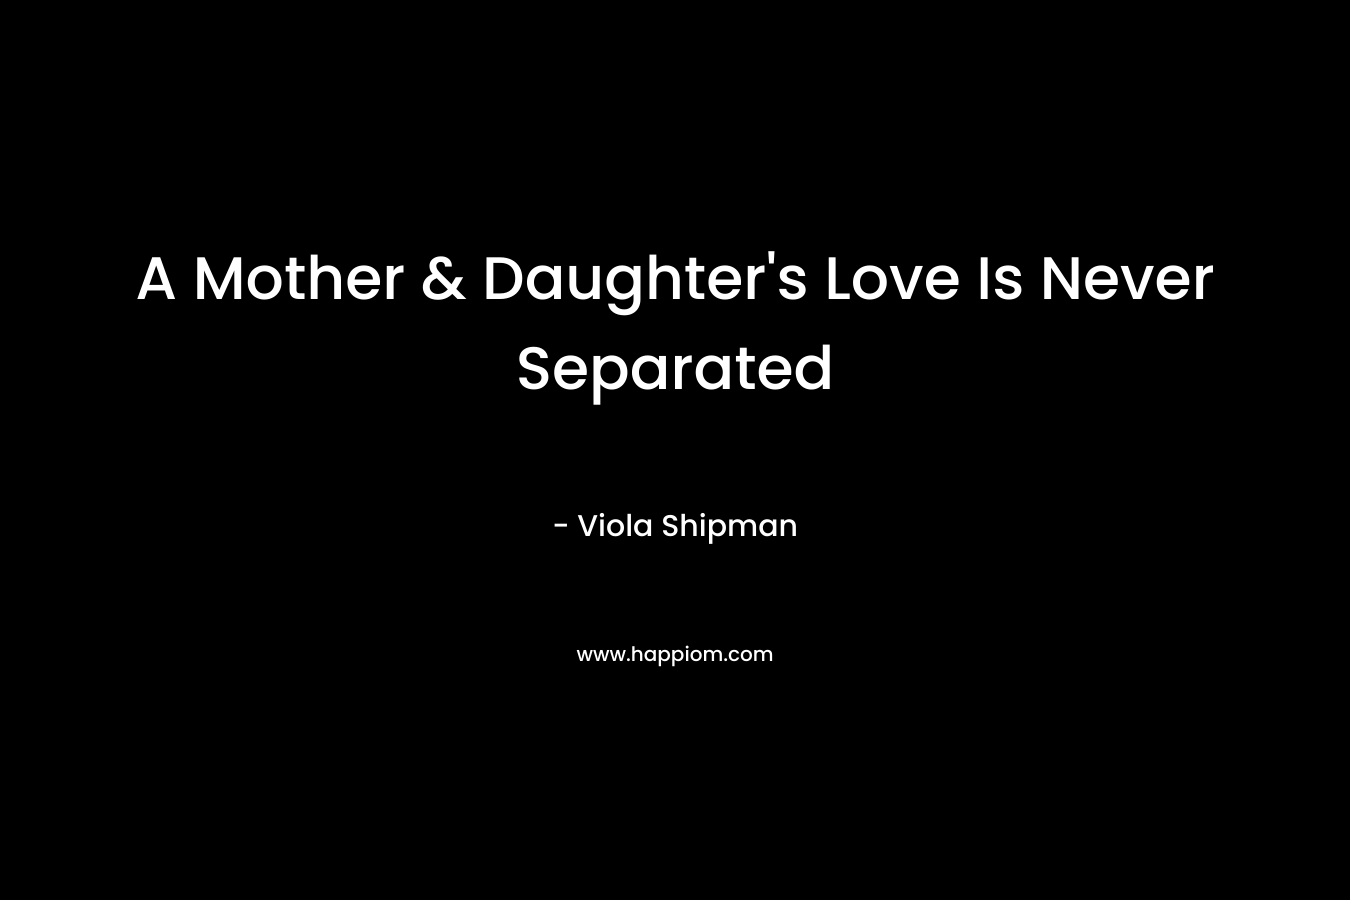 A Mother & Daughter's Love Is Never Separated